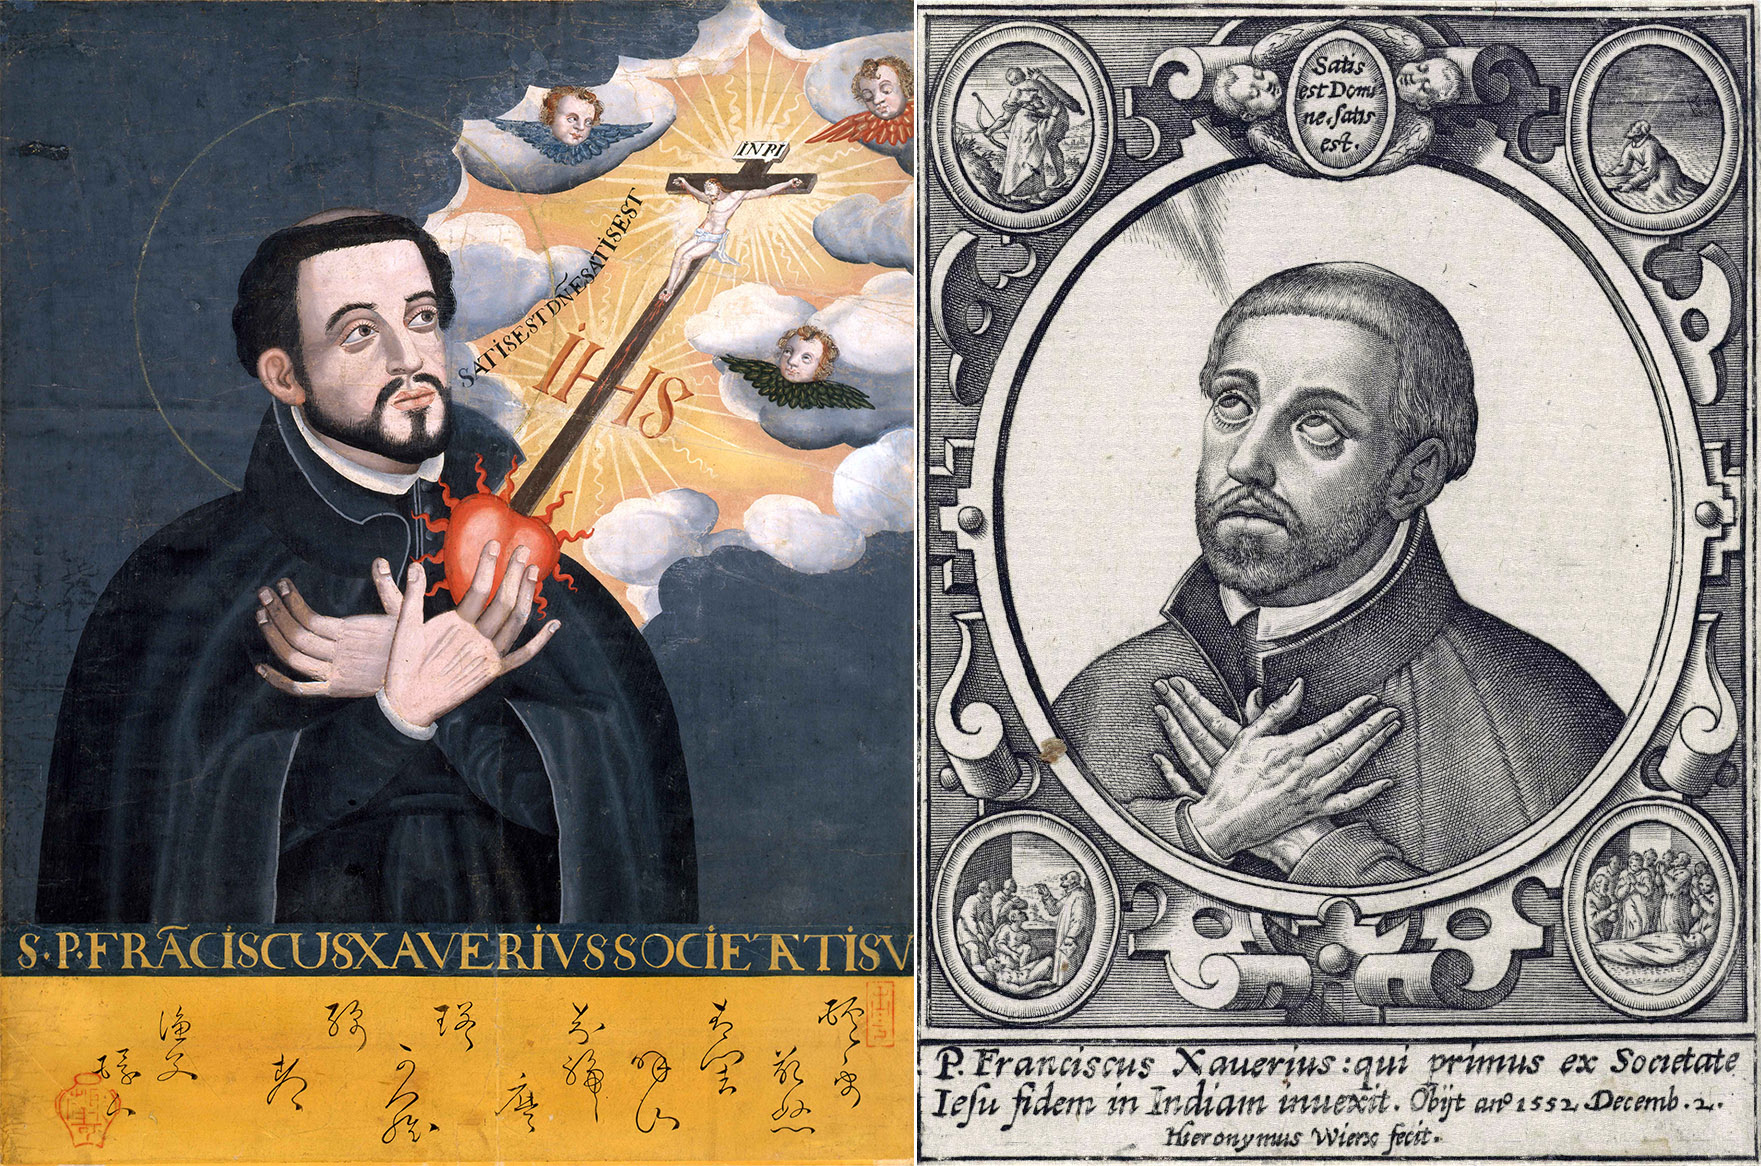 Right: Unknown Japanese painter, St. Francis Xavier, late sixteenth to early seventeenth centuries, Japanese watercolors on paper, 23.8 x 19 inches, Kobe City Museum (Photo: Wikimedia Commons). Left: Hieronymus Wierix, St. Francis Xavier, 1596, engraving, 84 mm x 61 mm (Photo: Rijksmuseum) 